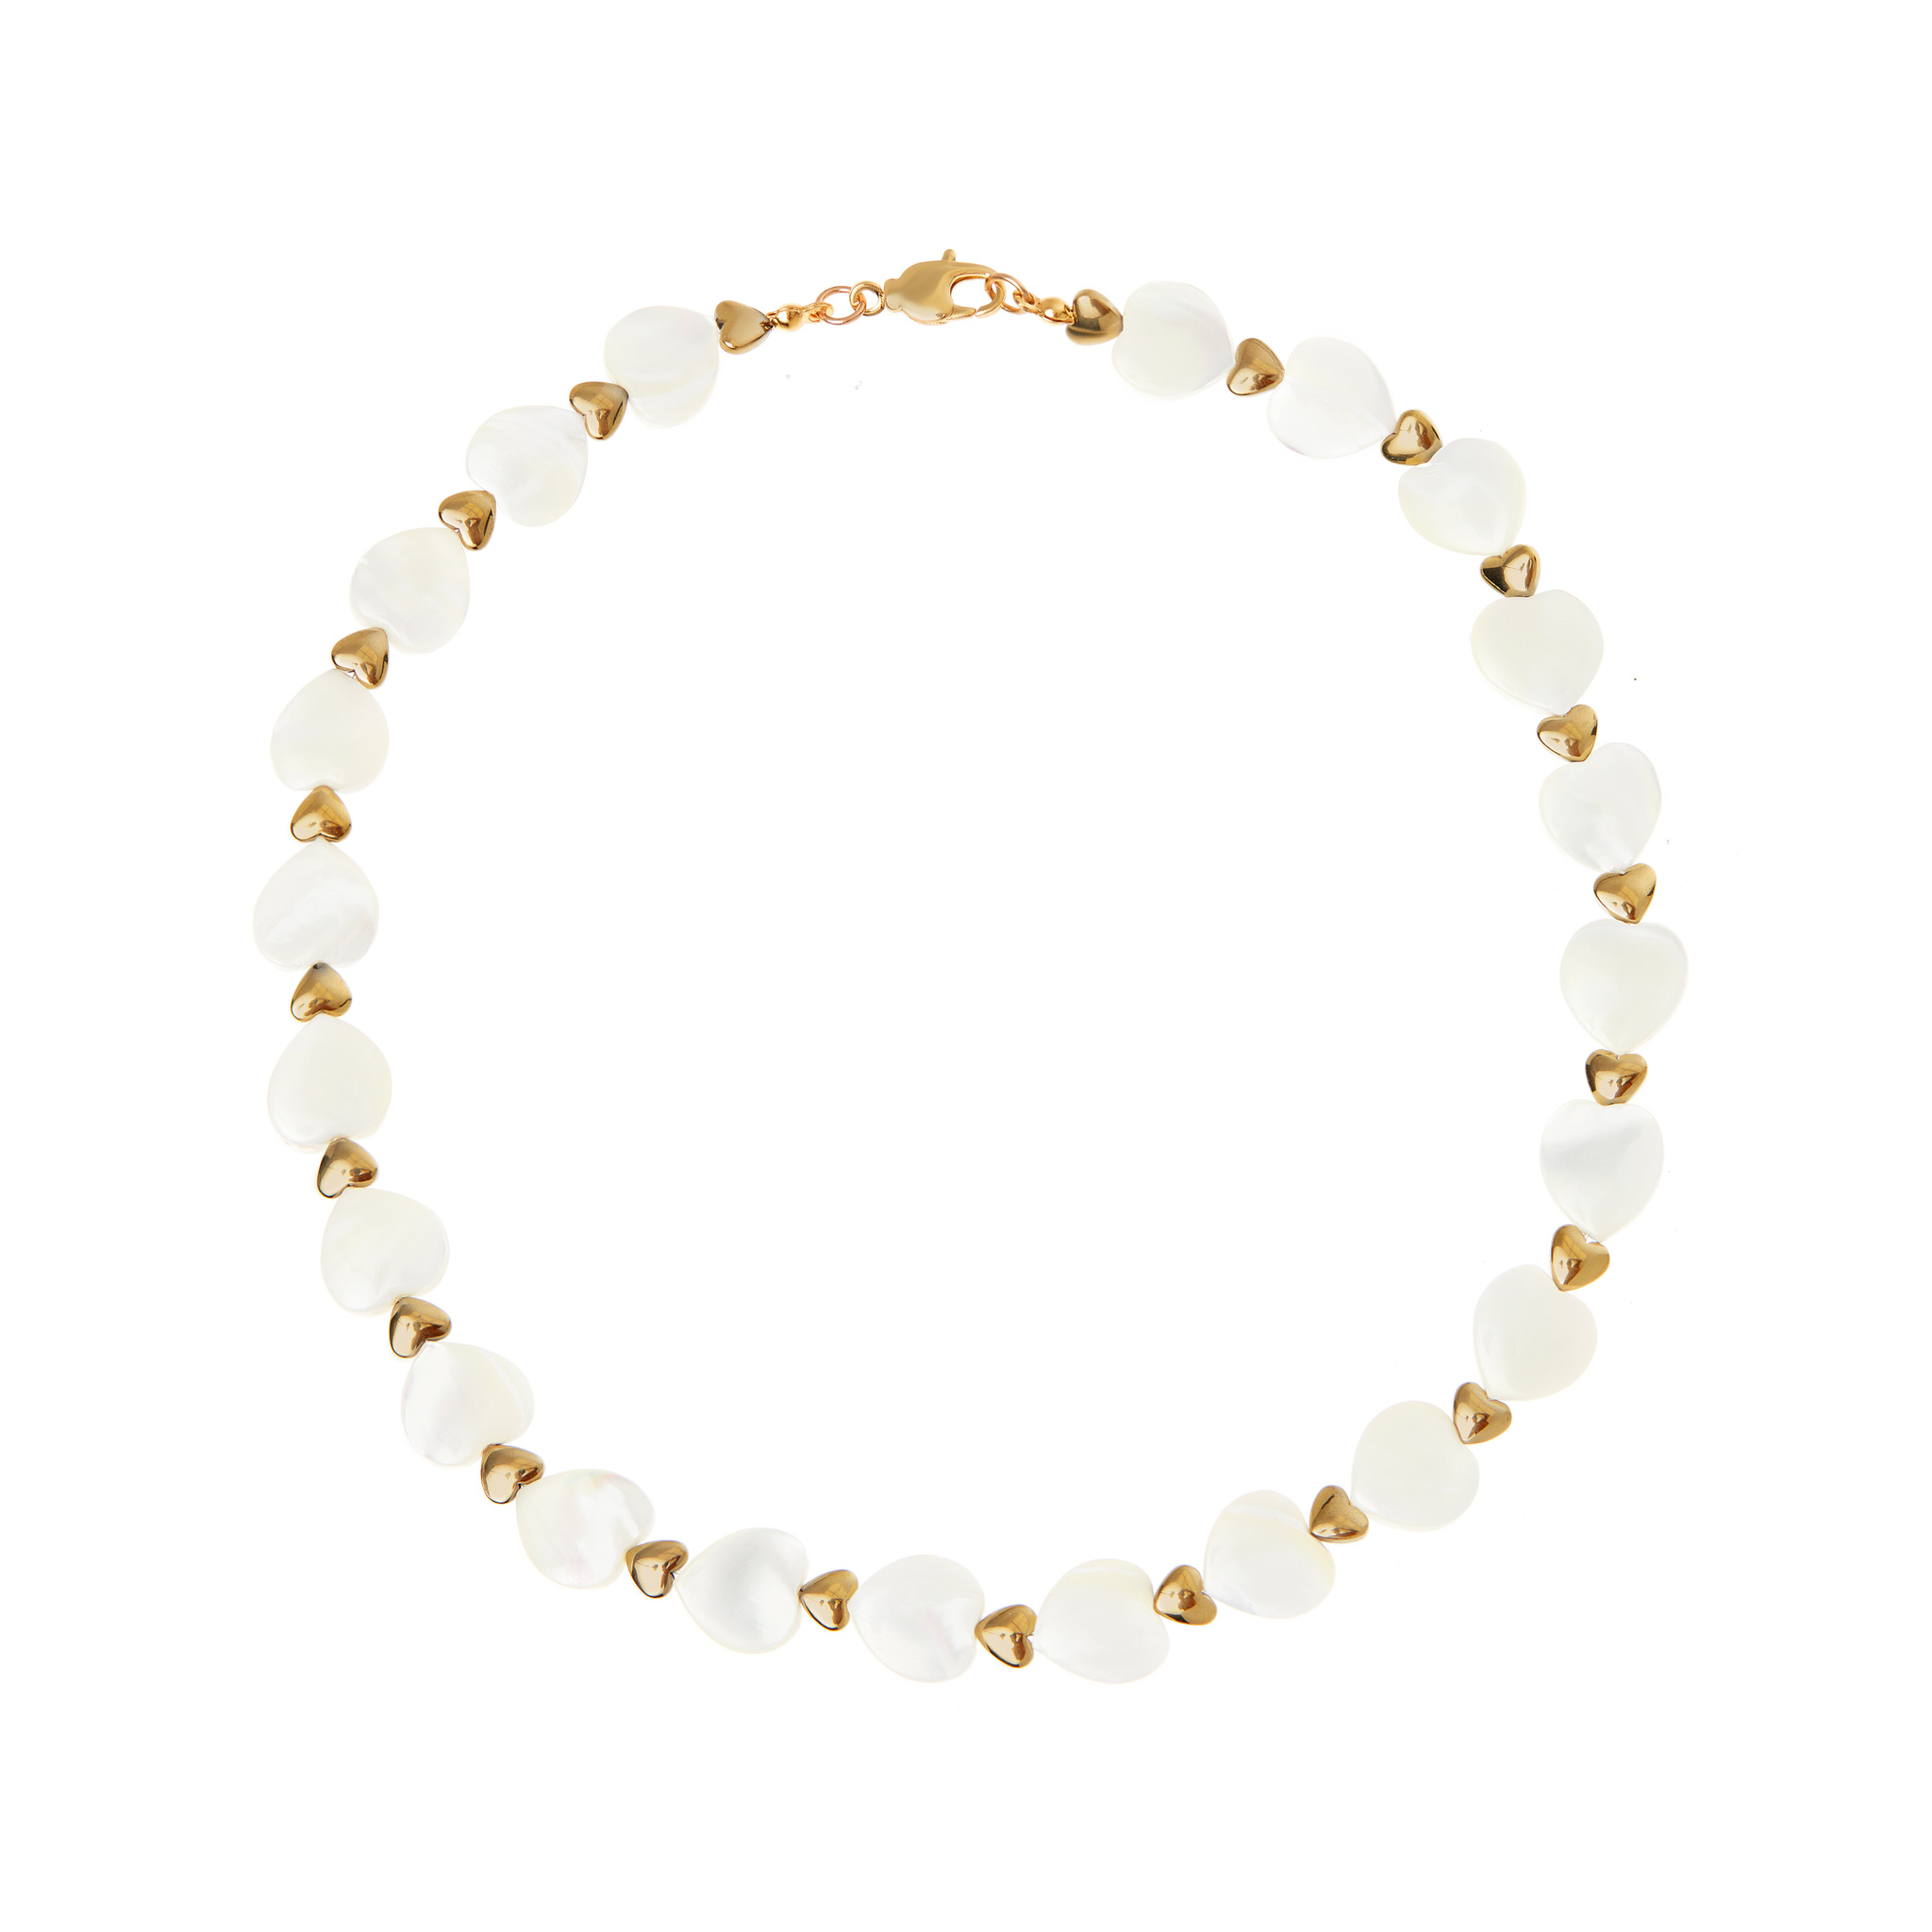 HOLLY JUNE Колье Pearl Heart Necklace holly june колье major pearl twist necklace